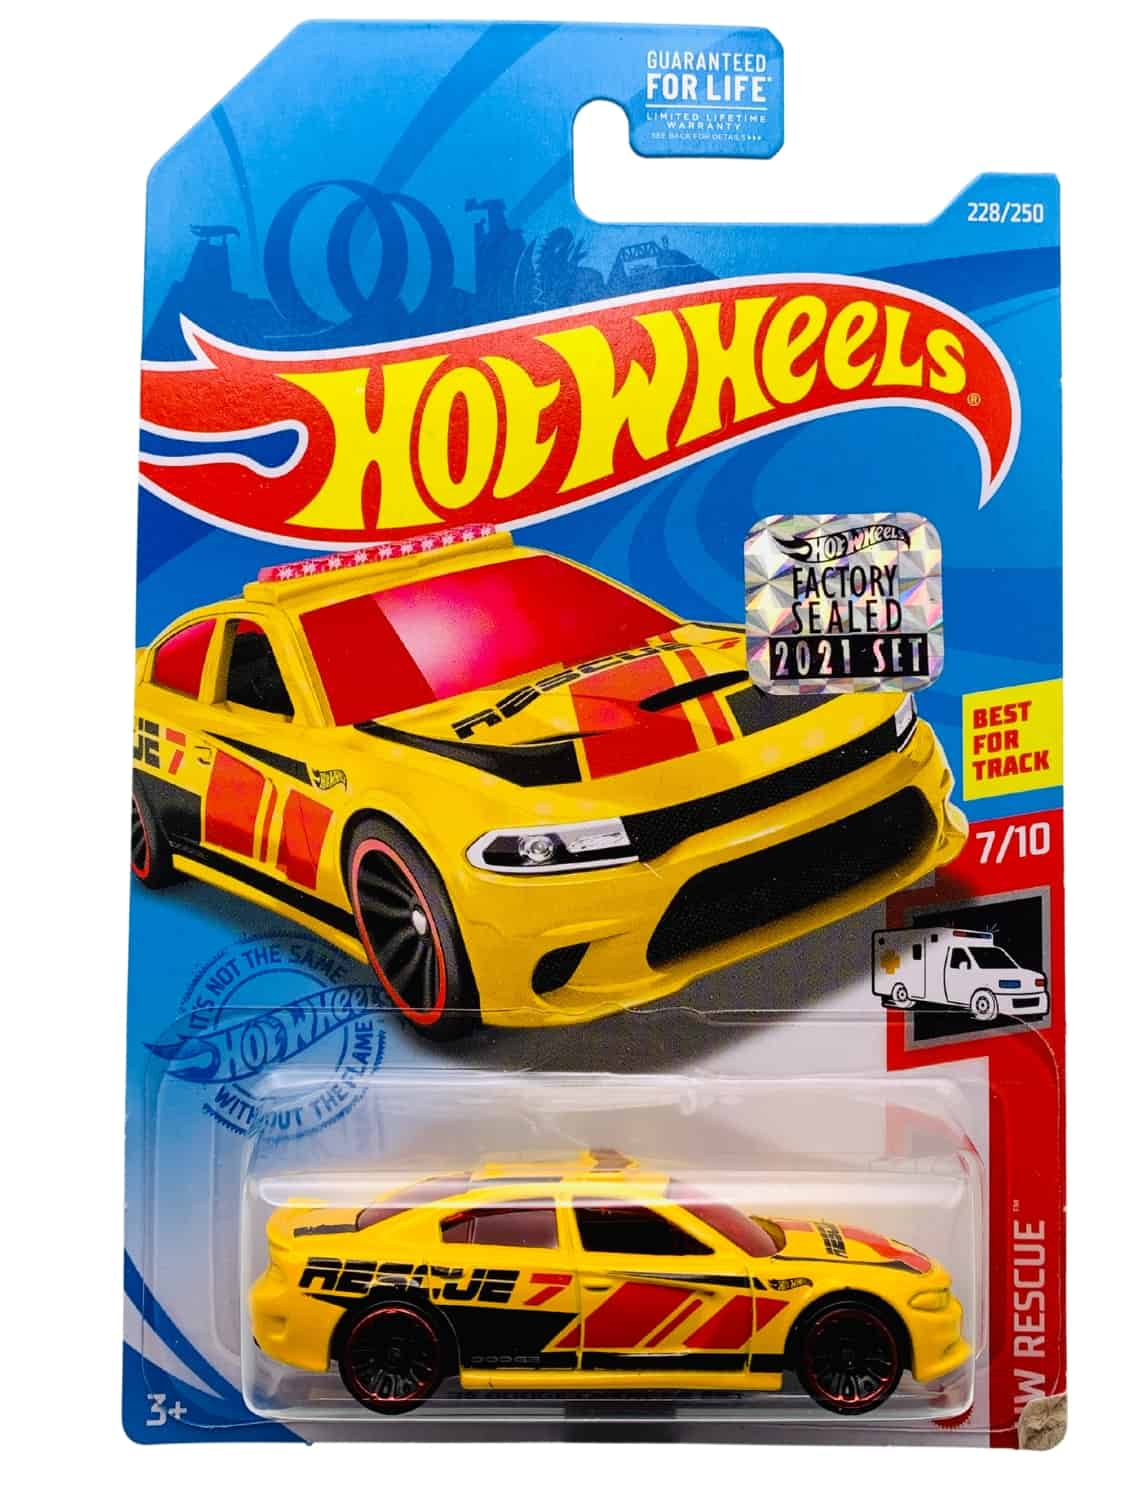 GTB14 2015 Dodge Charger rescue yellow hot wheels